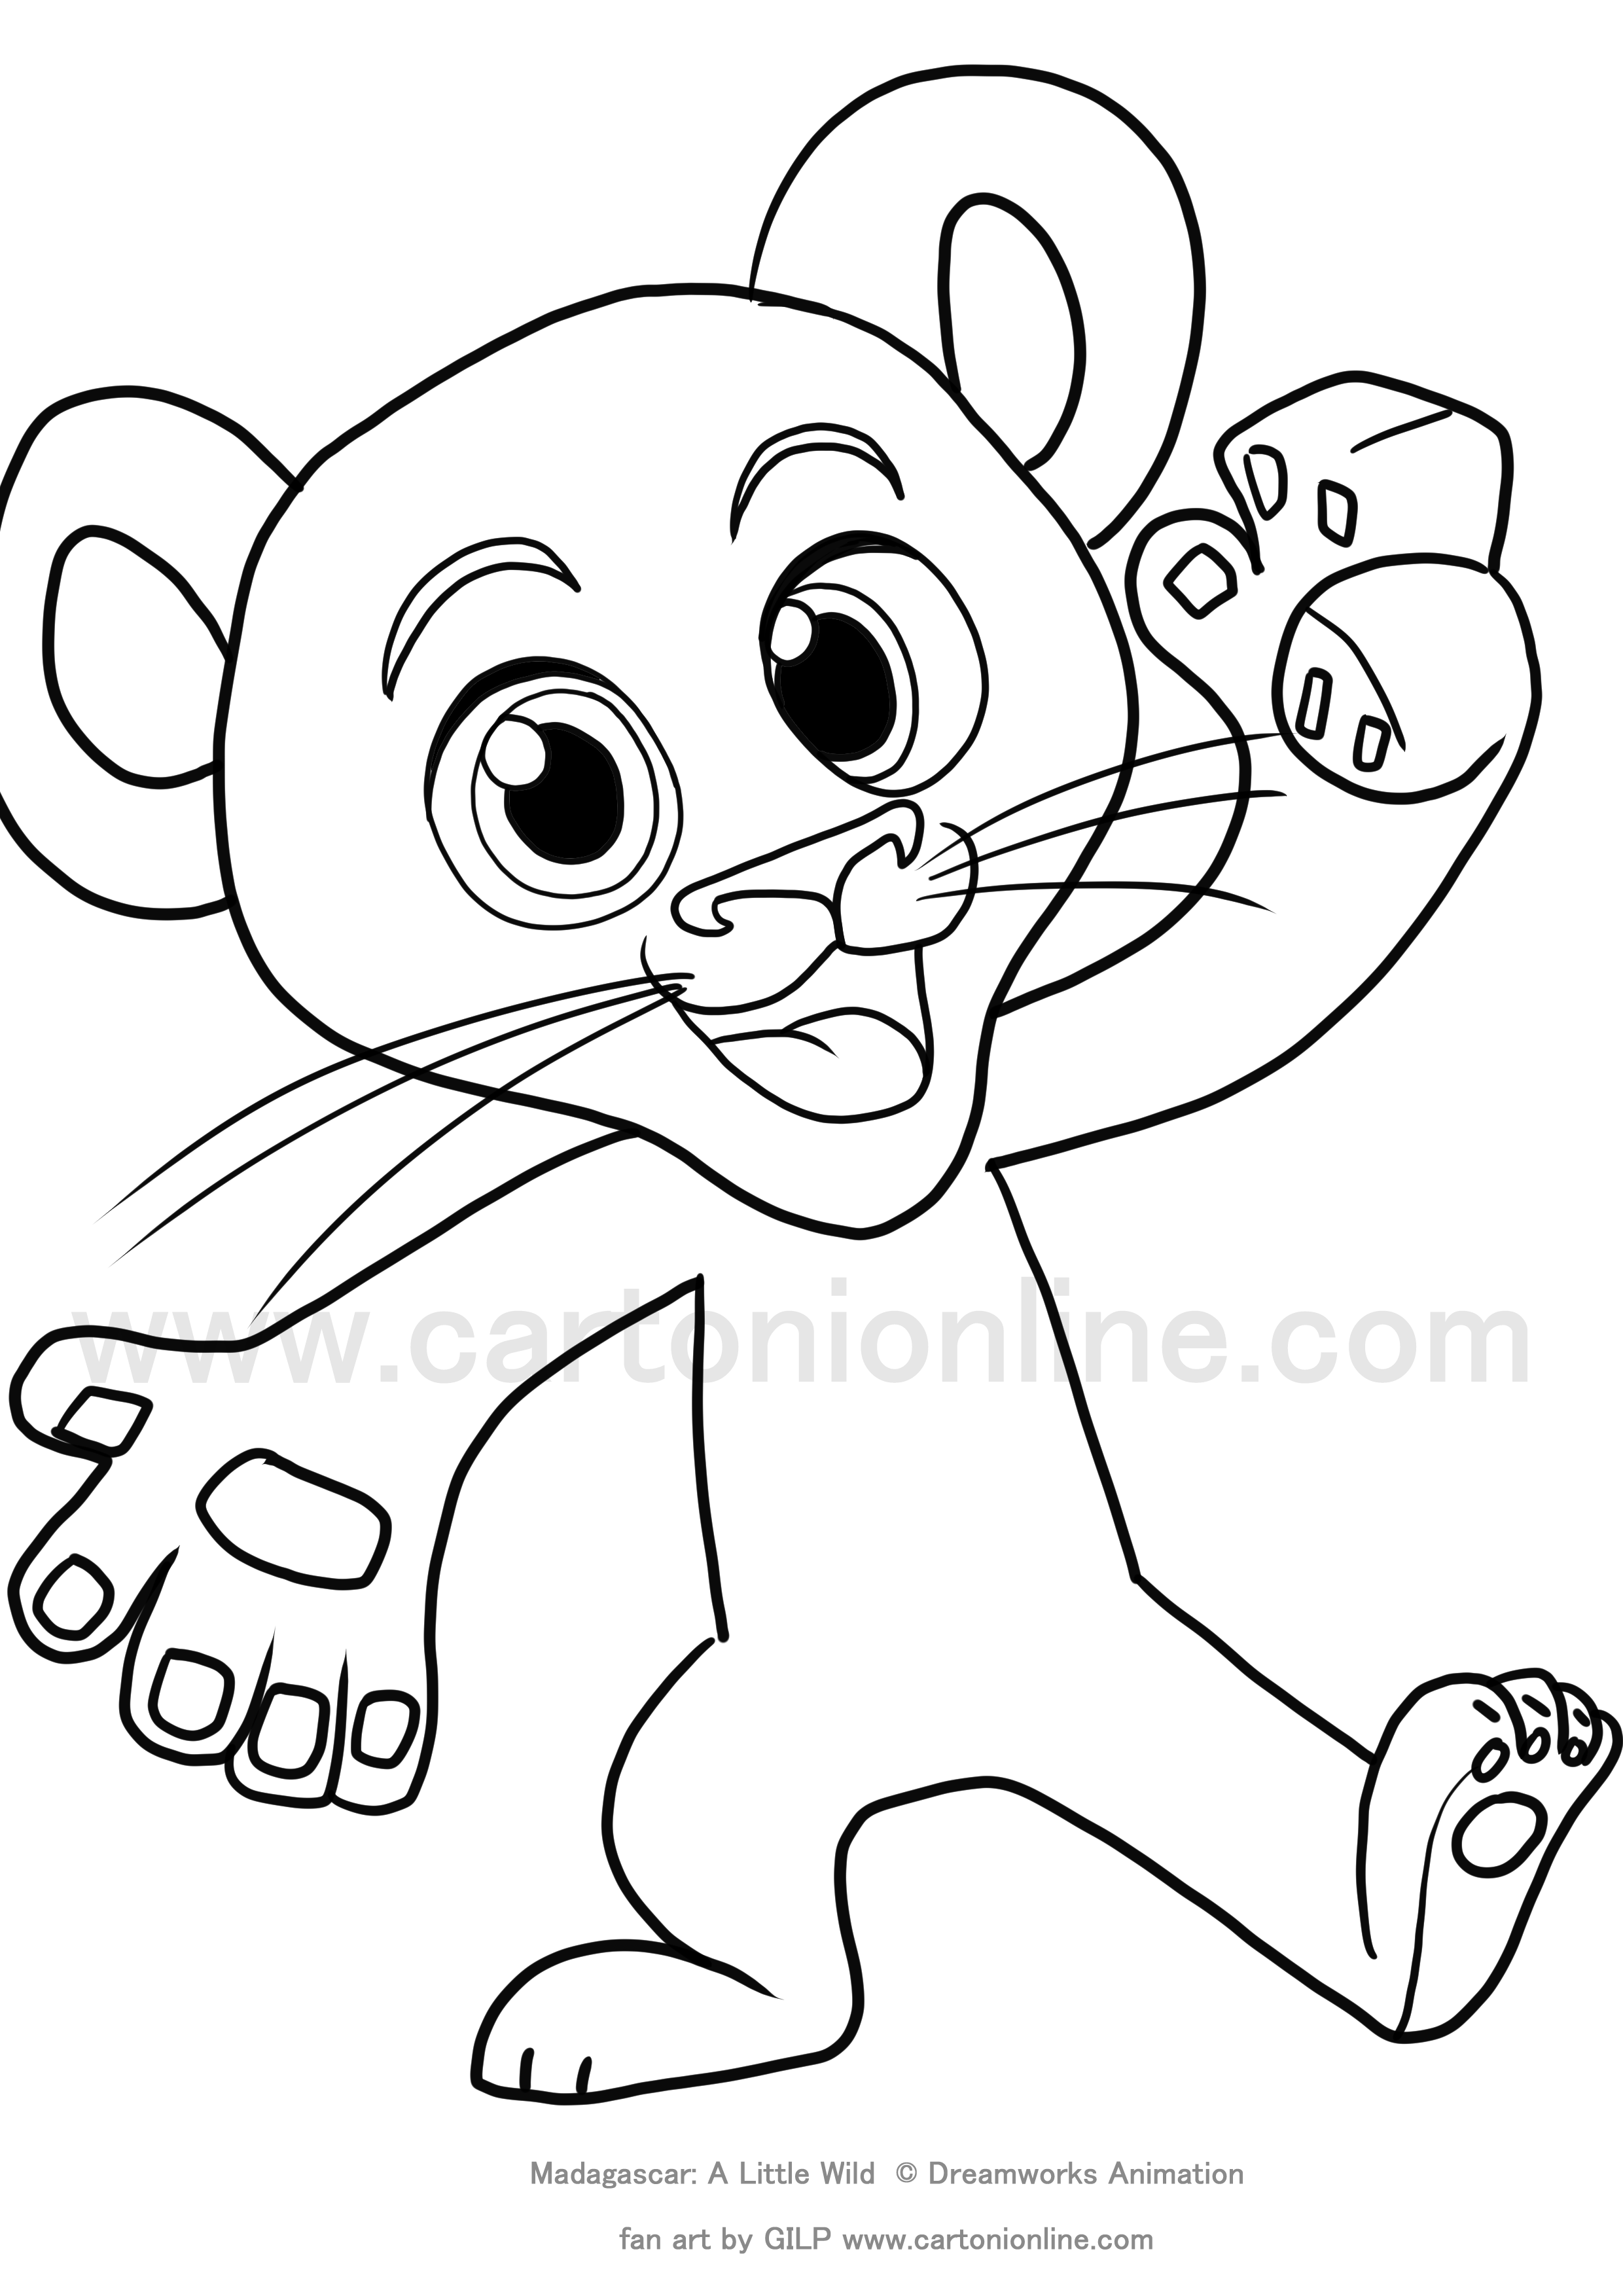 Drawing Alex from Madagascar - The 4 of the wild oasis to print and coloring